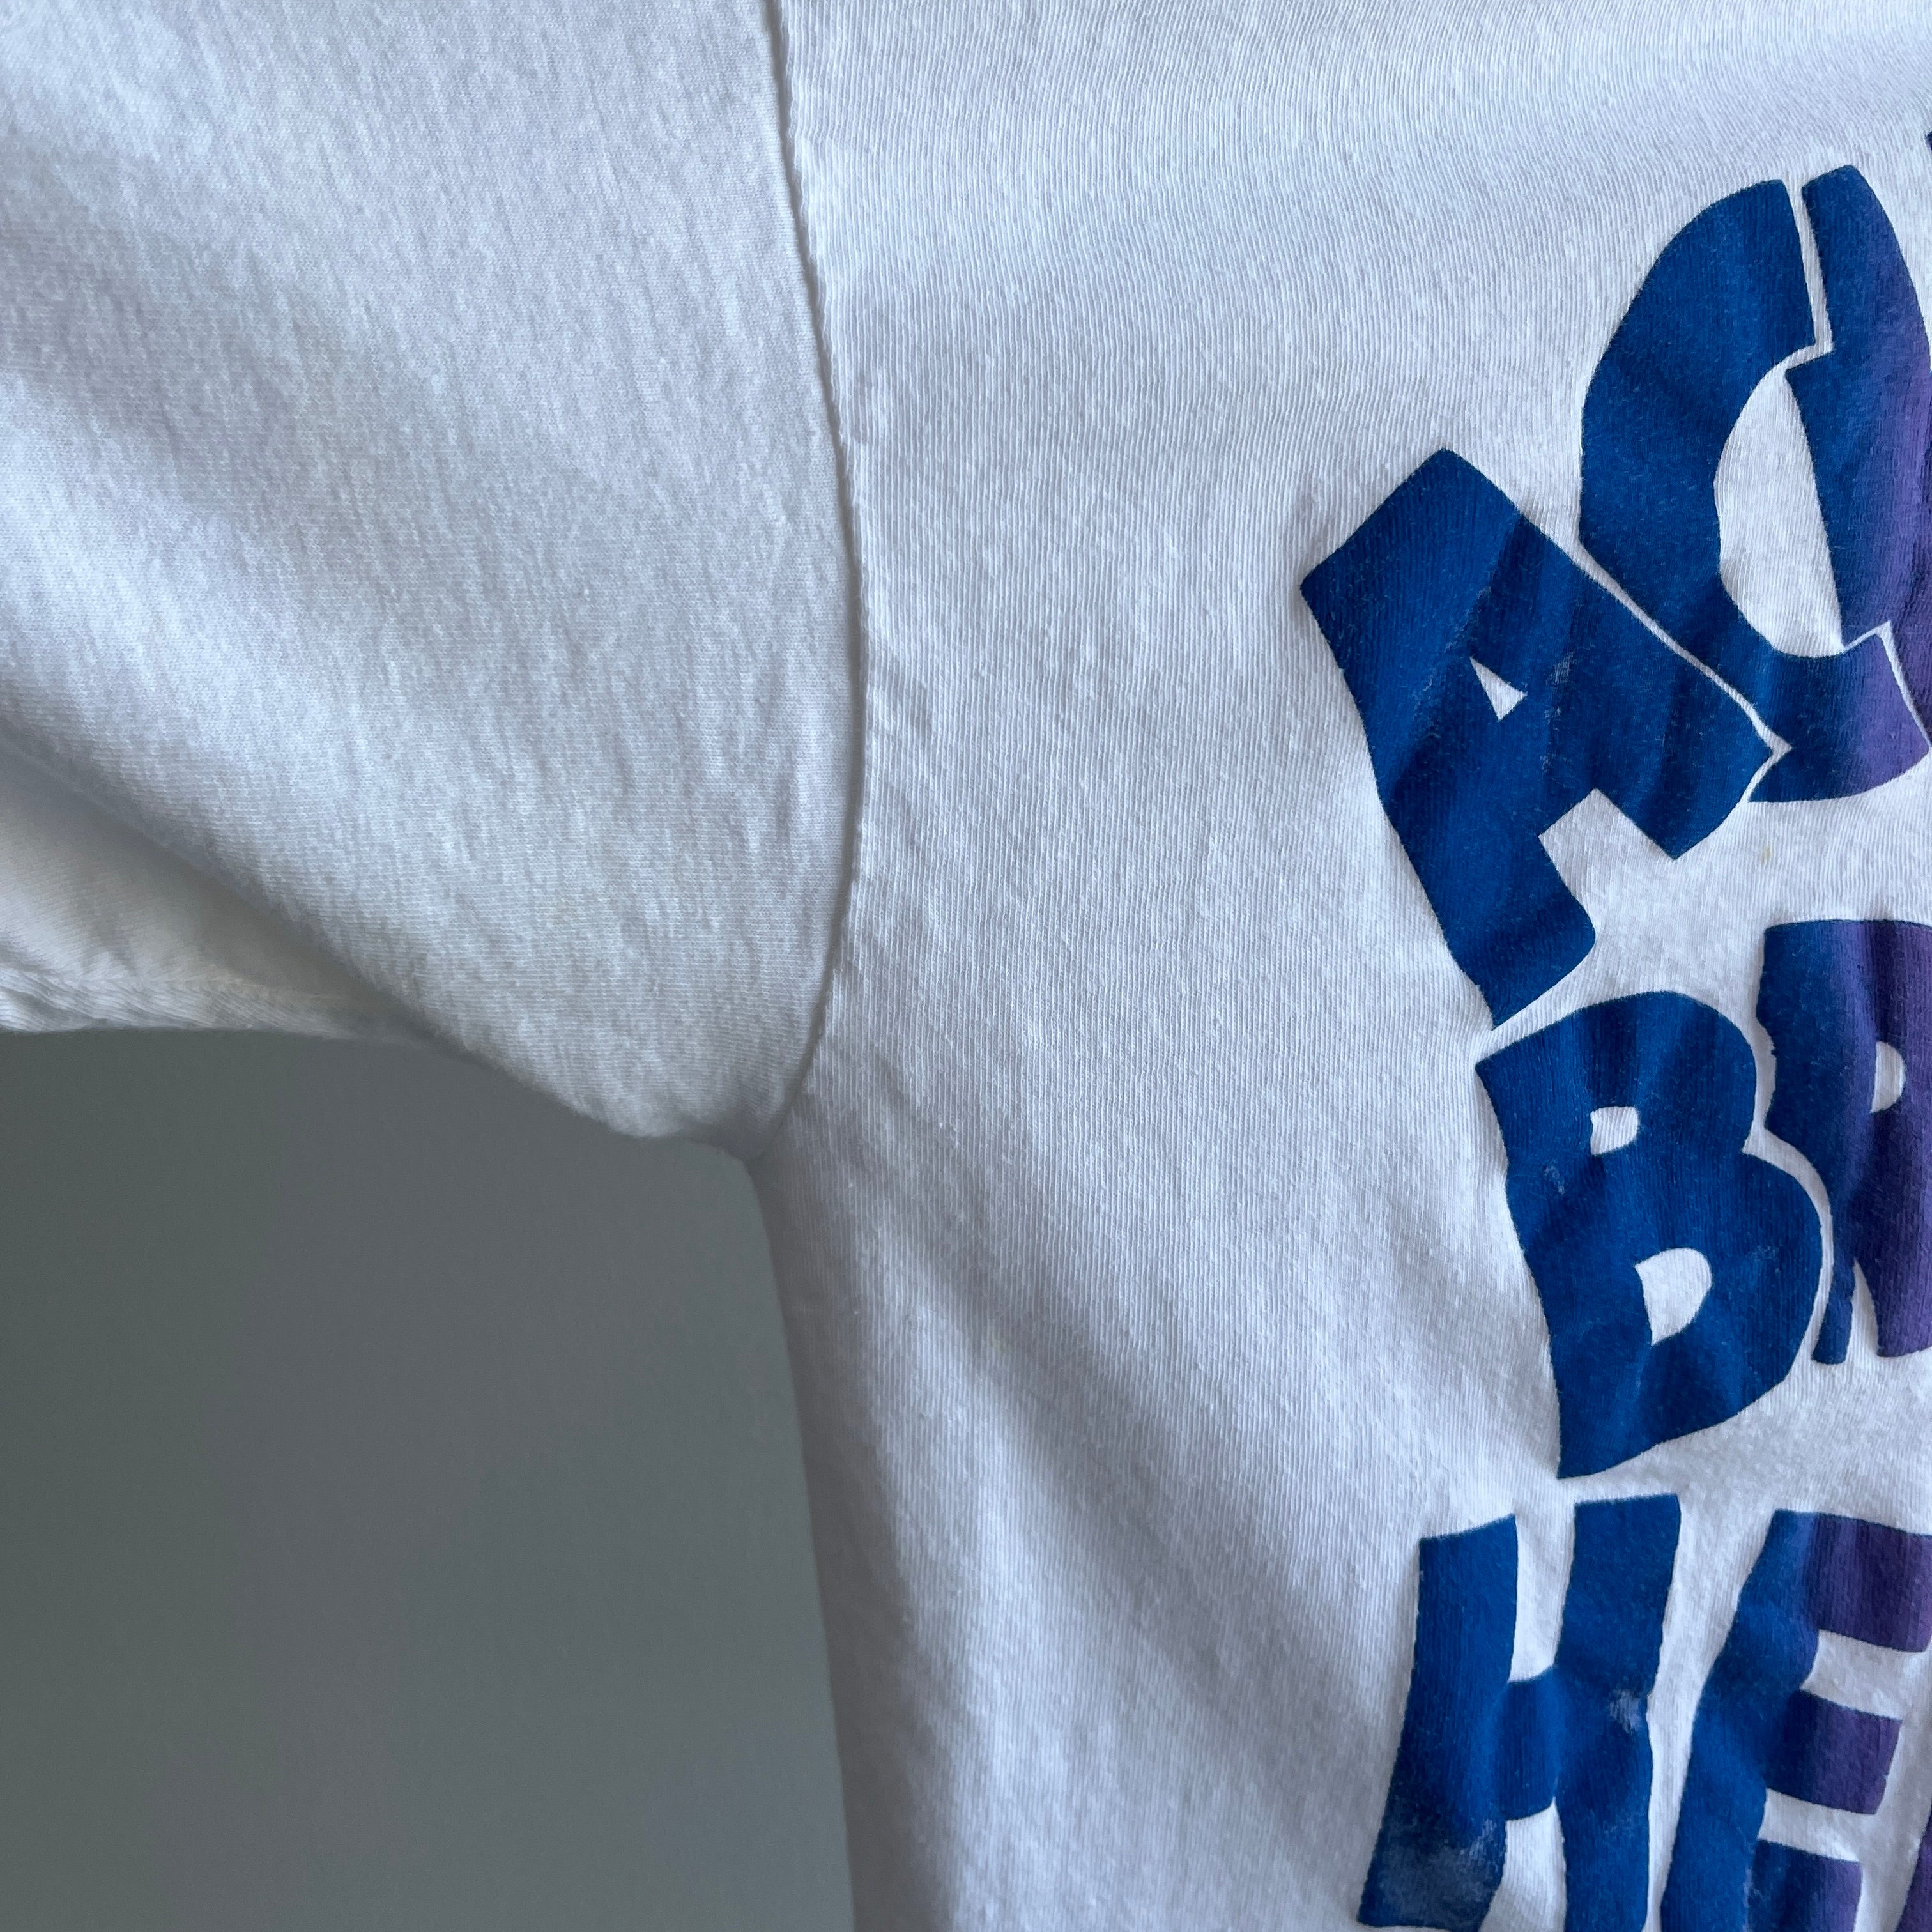 1992 Achy Breaky Heart Slightly Off Centered T-Shirt